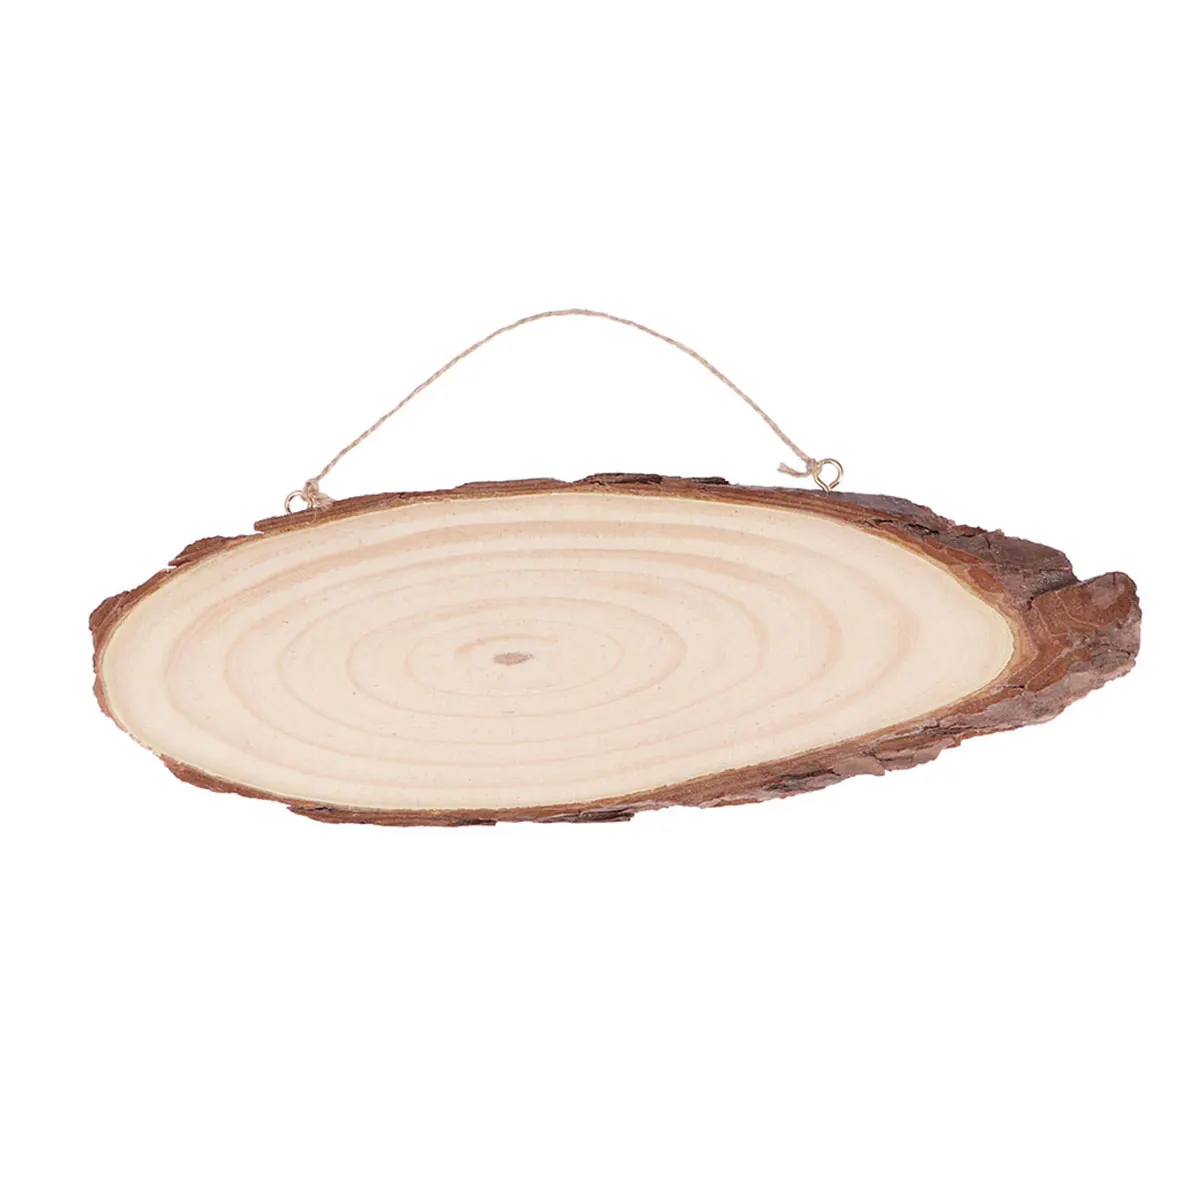 

22x7cm Oval Blank Wooden Disc Tree Log Slice Plaques with 2 Hooks and Rope for DIY Decoration Crafts Projects